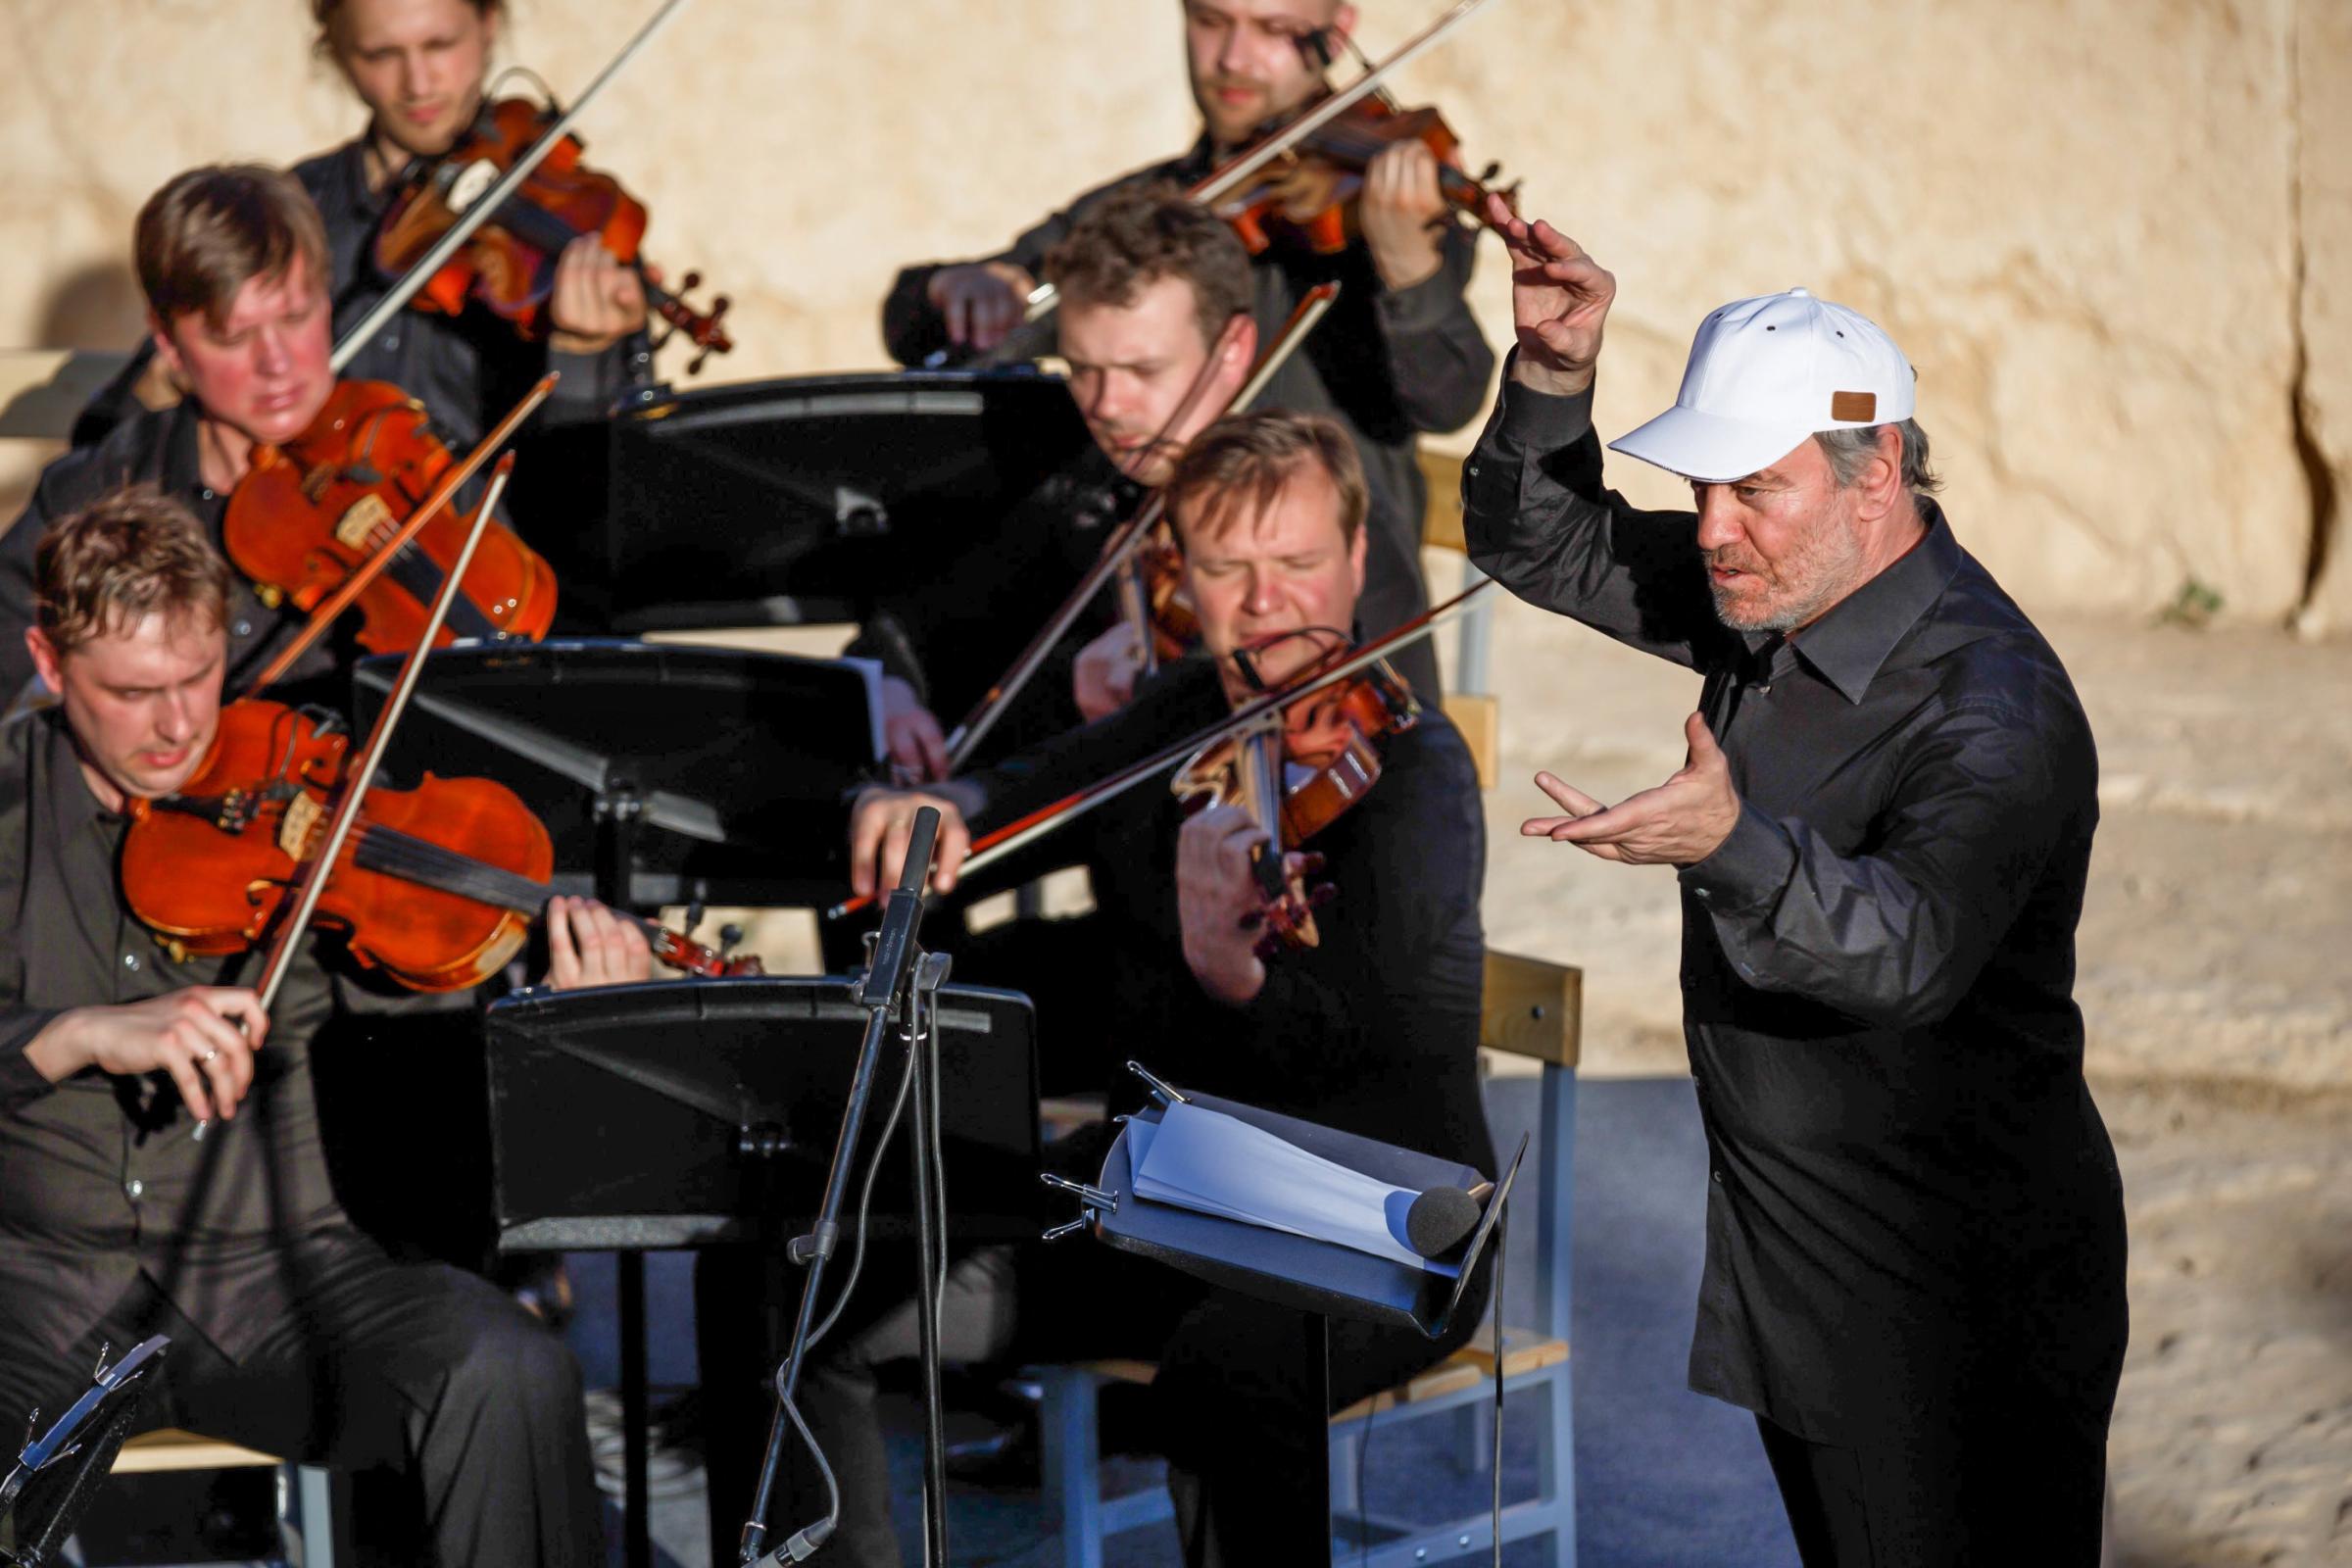 In this photo released by Russian Ministry of Defence, conductor Valery Gergiev leads a concert by the Mariinsky Theater Orchestra in the Palmyra amphitheater in Syria, on May 5, 2016.